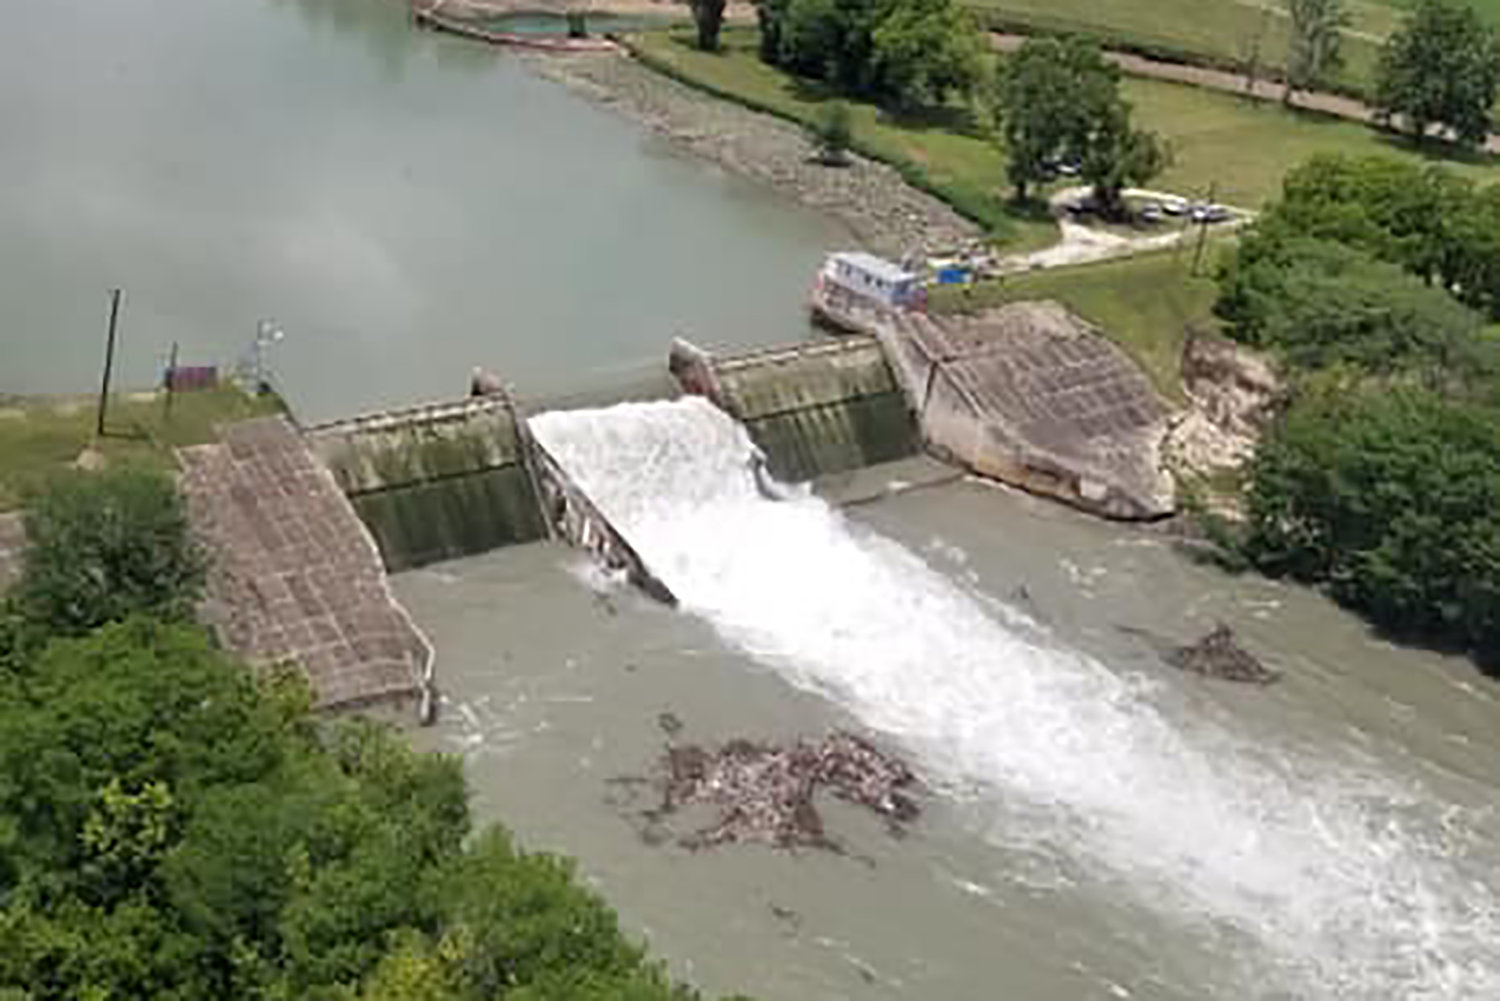 The Lake Dunlap dam experienced a massive spill gate failure the morning of Tuesday, May 14. GBRA warned of dangerous river conditions for recreationists with passing river flows of approximately 11,000 cubic feet per second.